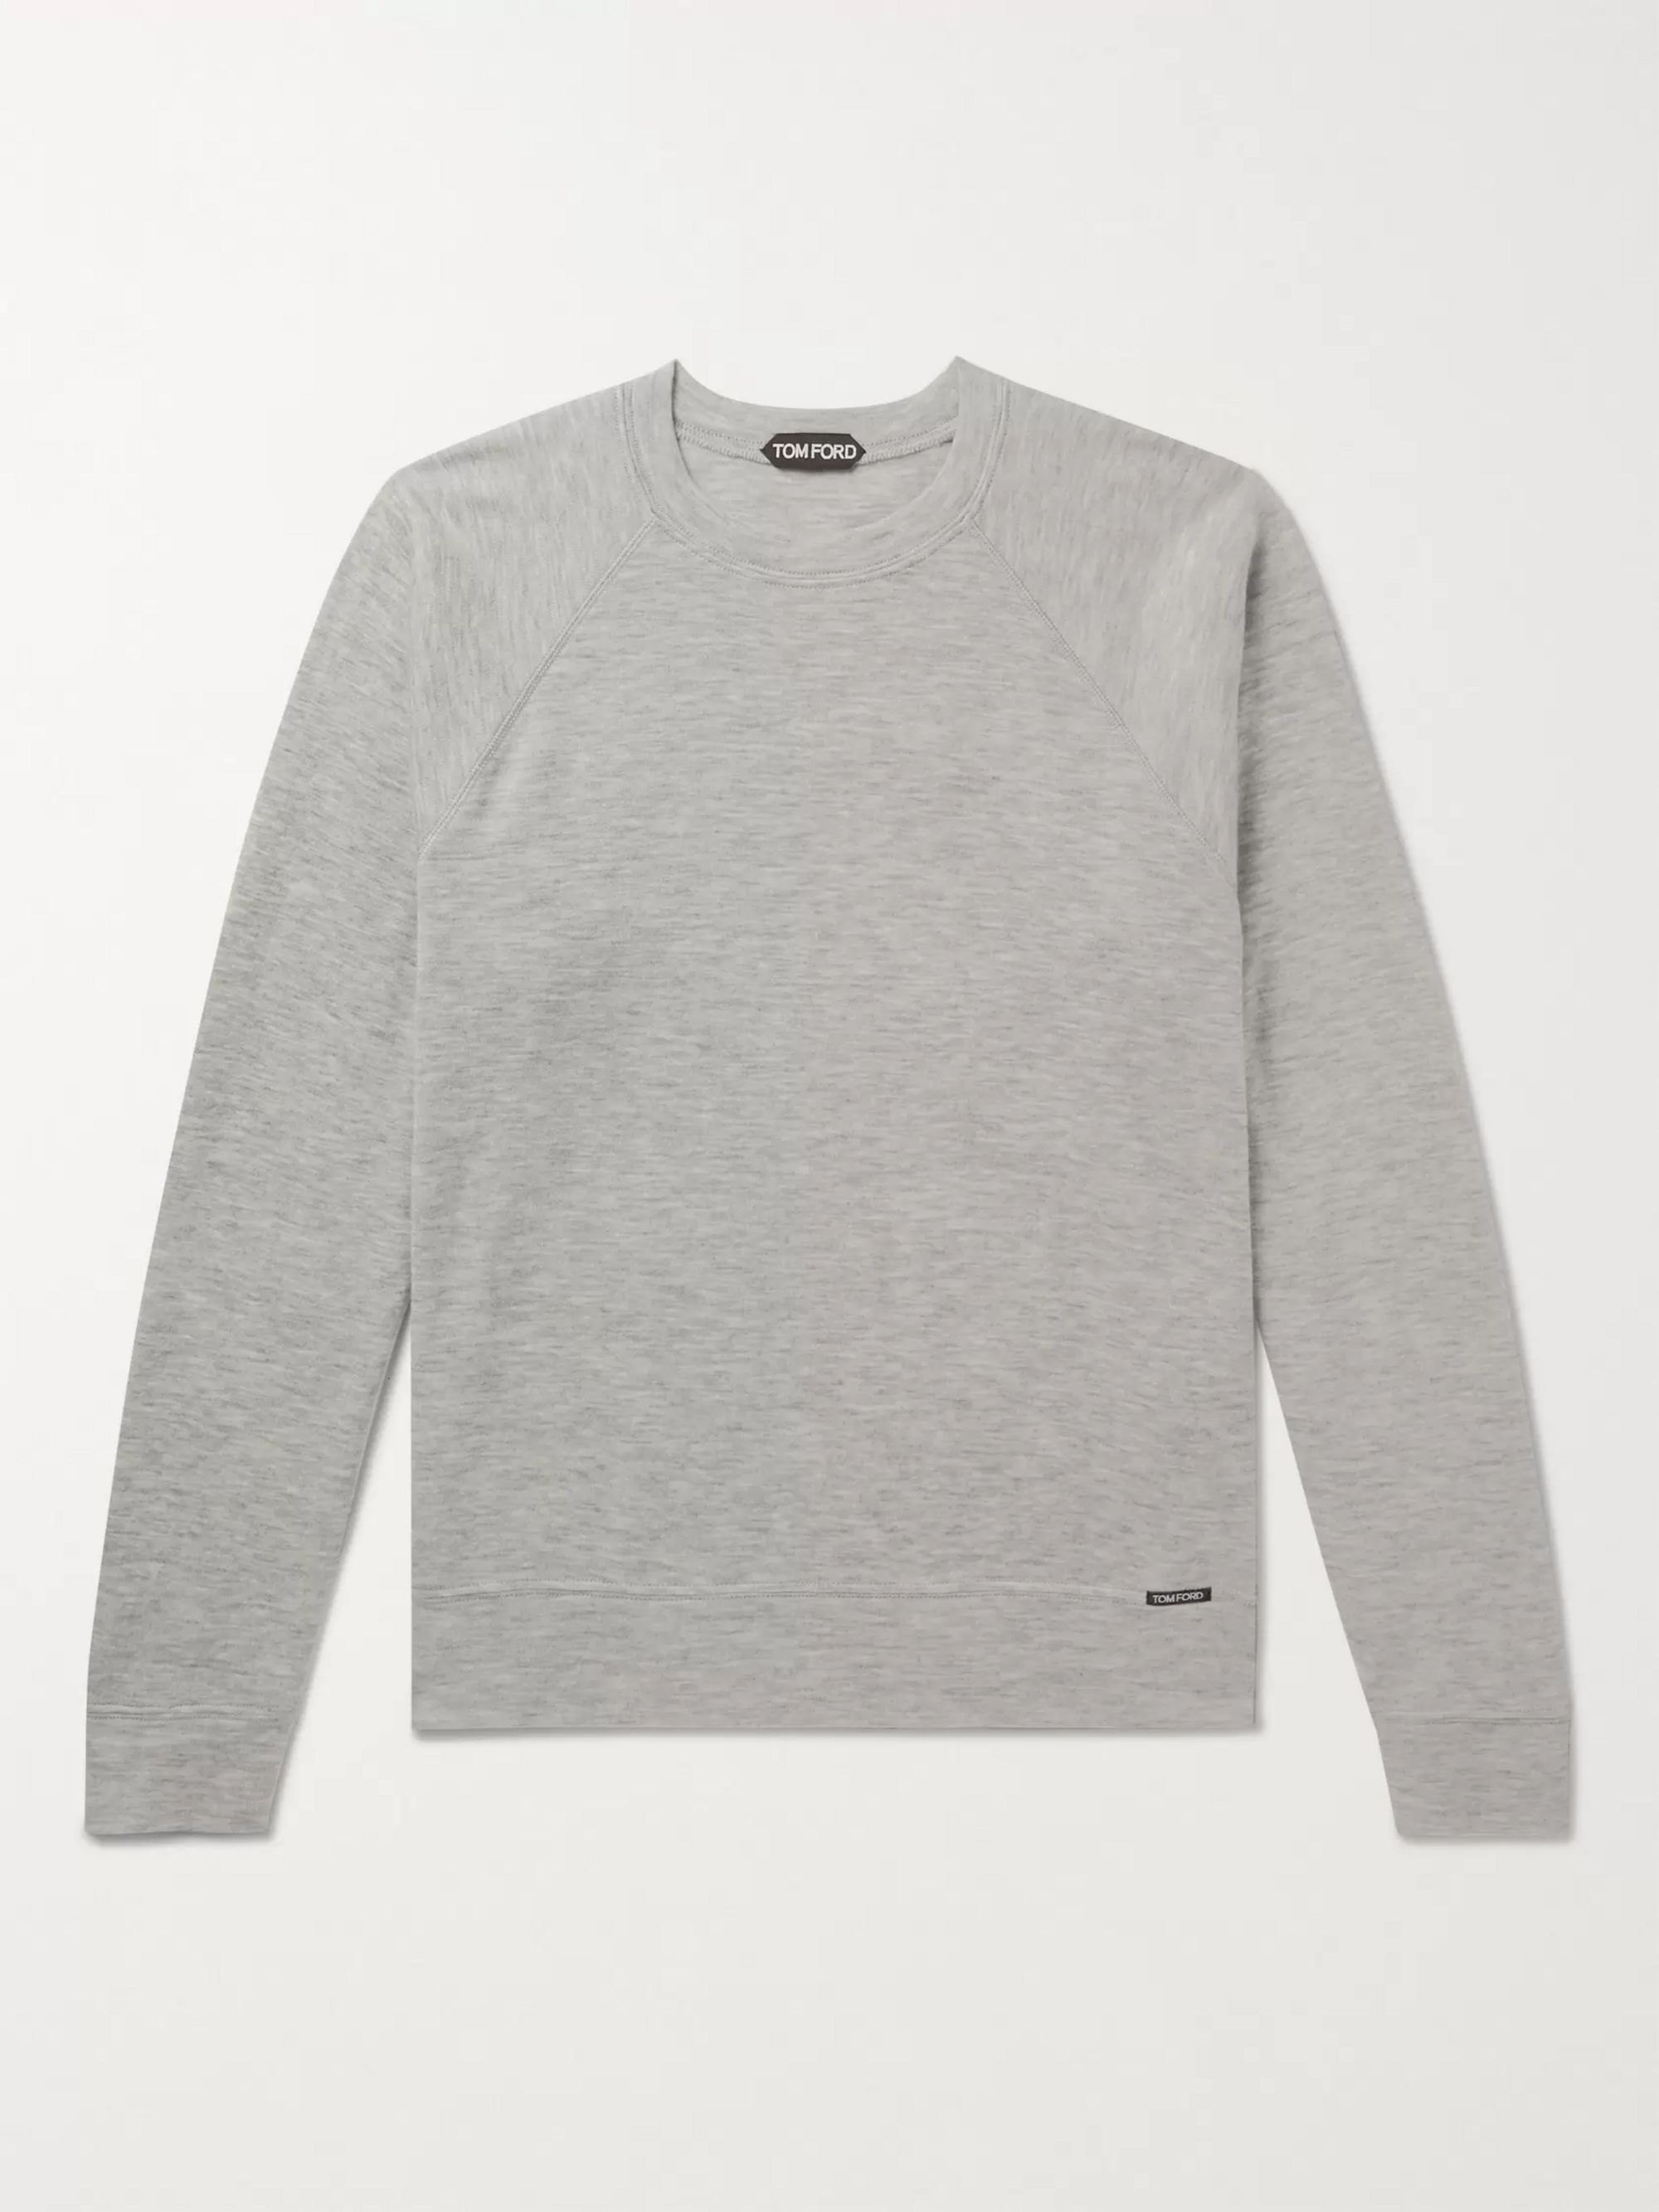 cashmere jersey